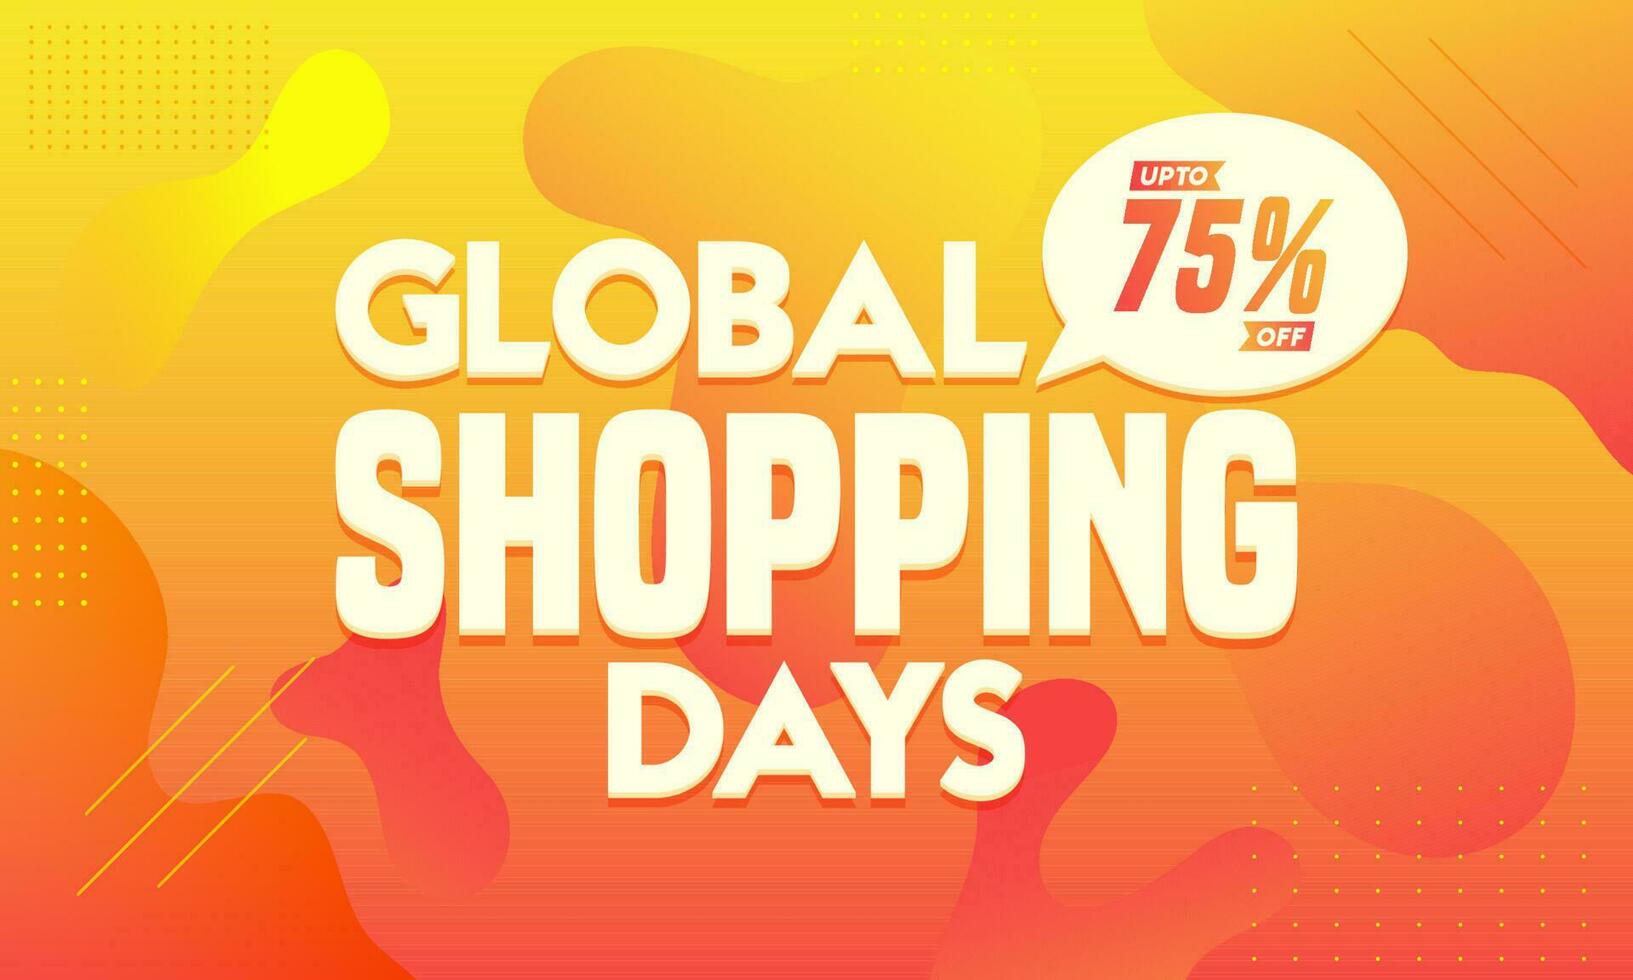 Advertising banner or poster design with discount offer on abstract fluid art background for Global Shopping Days. vector